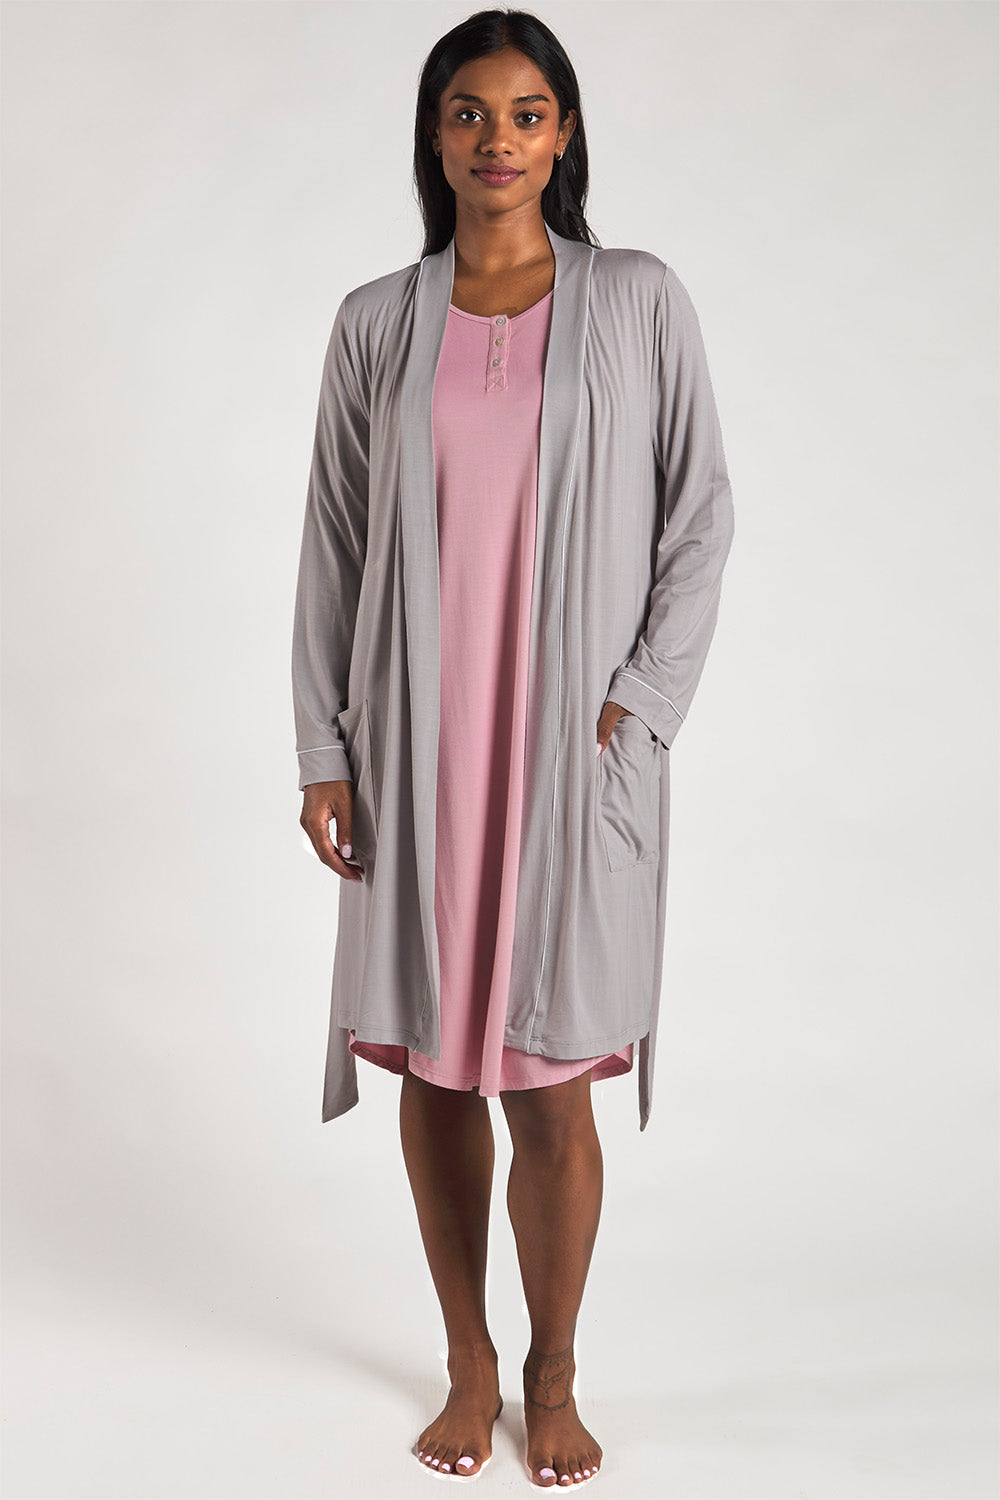 A woman wearing a sustainable bamboo sleep dress in Pink paired with an ultra-soft bamboo lounge robe in Ice Grey.